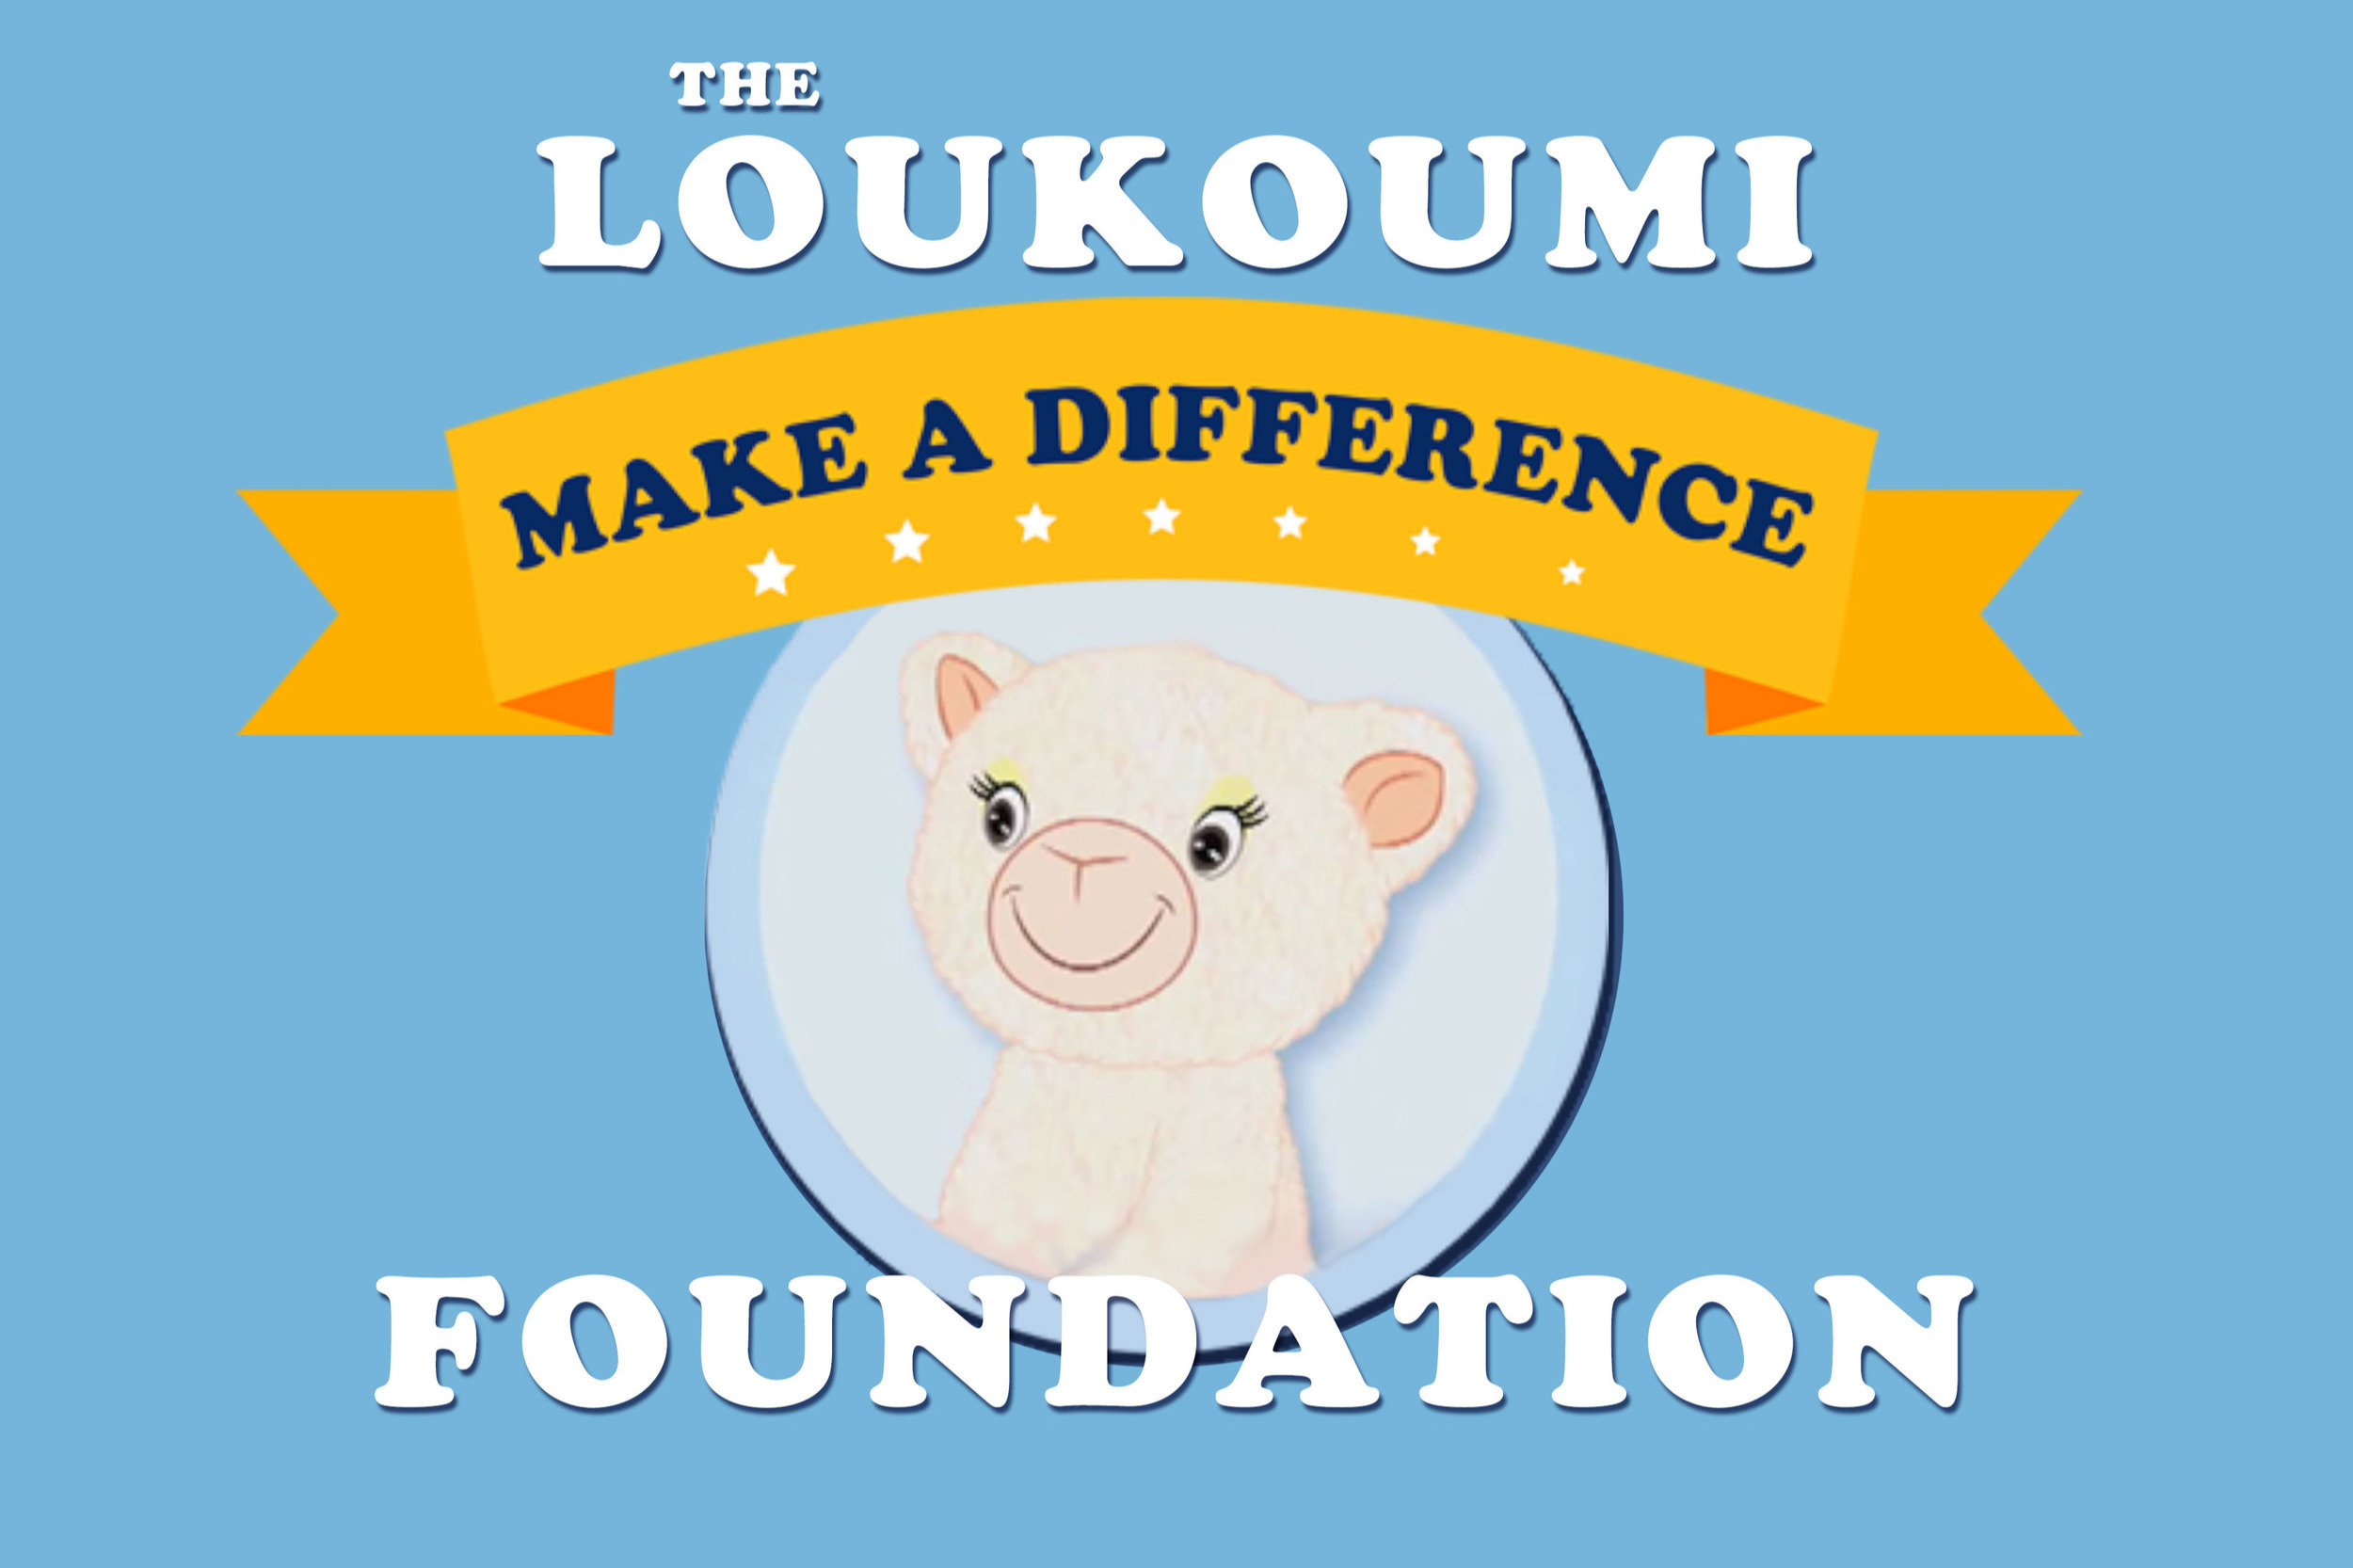 The Loukoumi Make a Difference Foundation